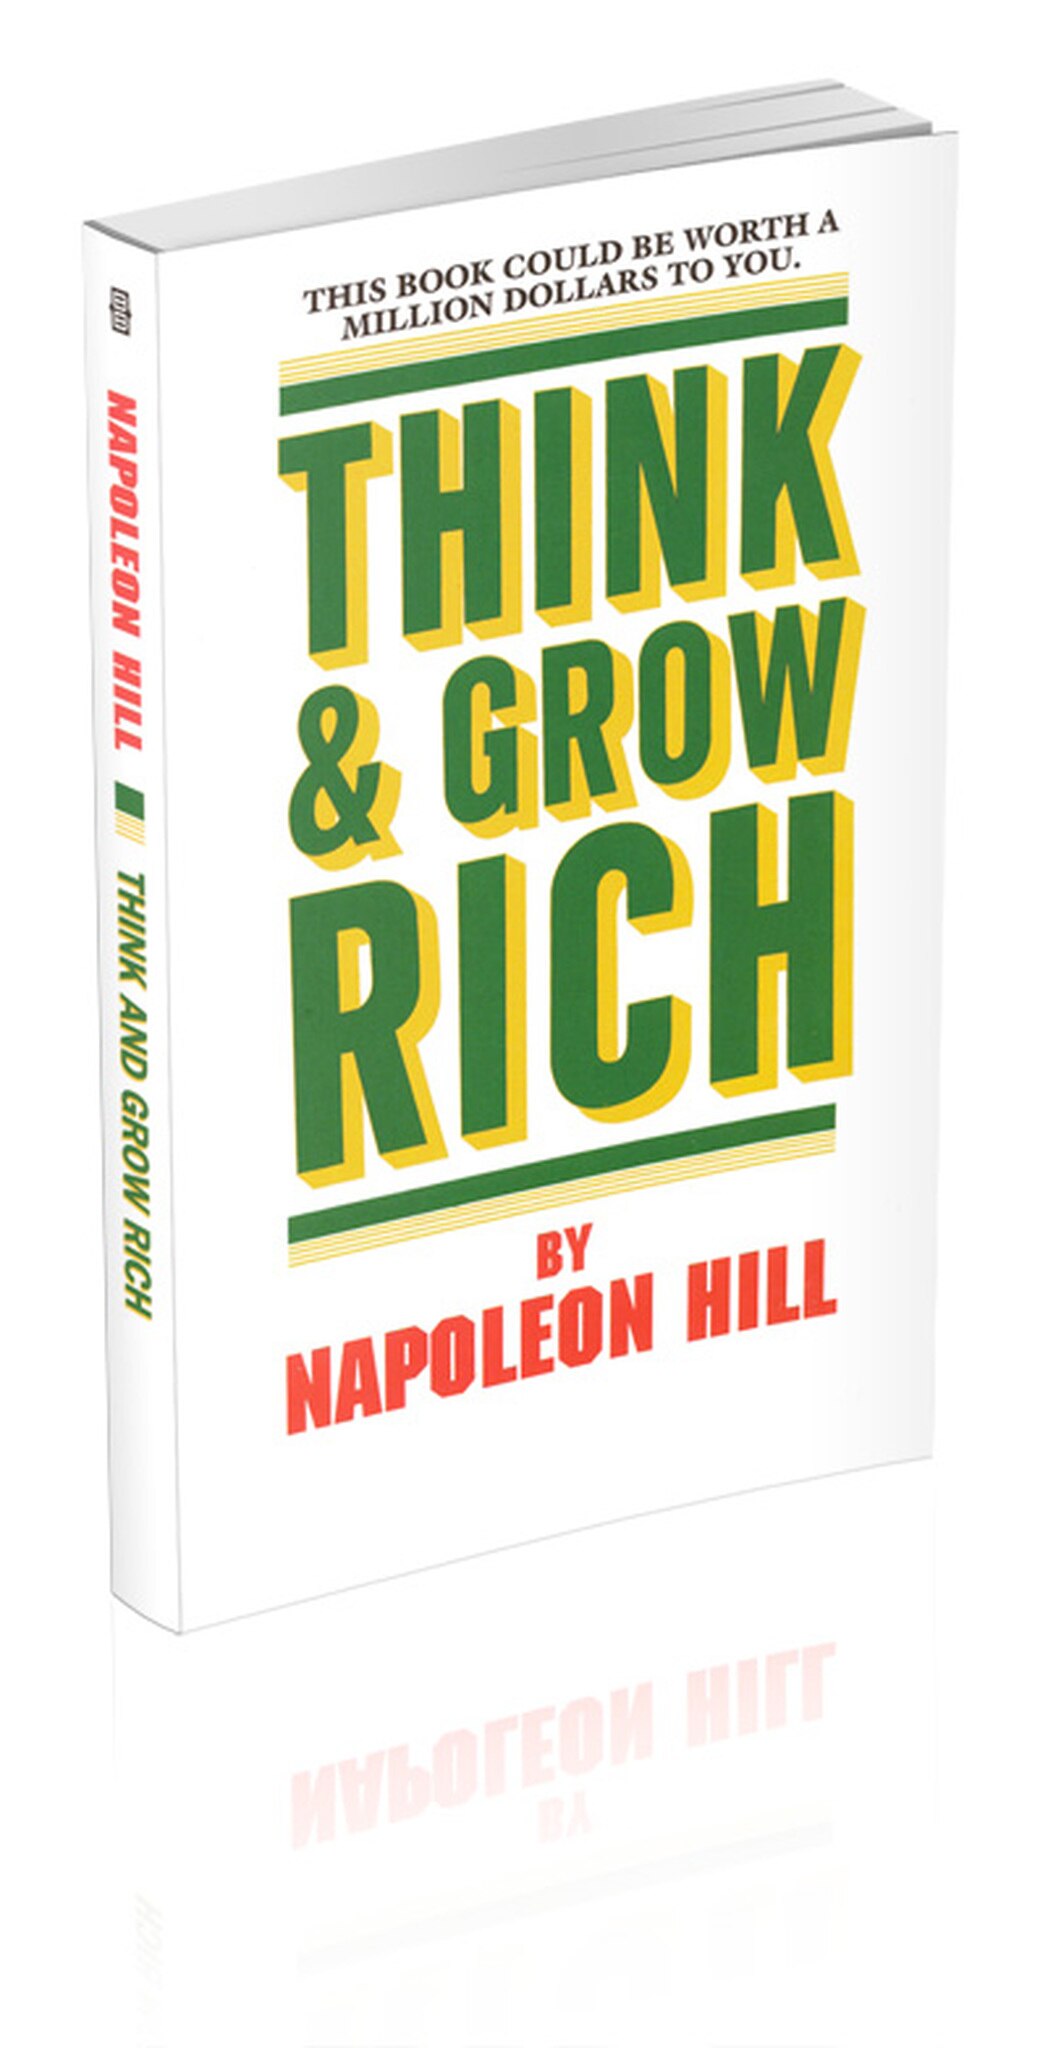 think and grow rich printable